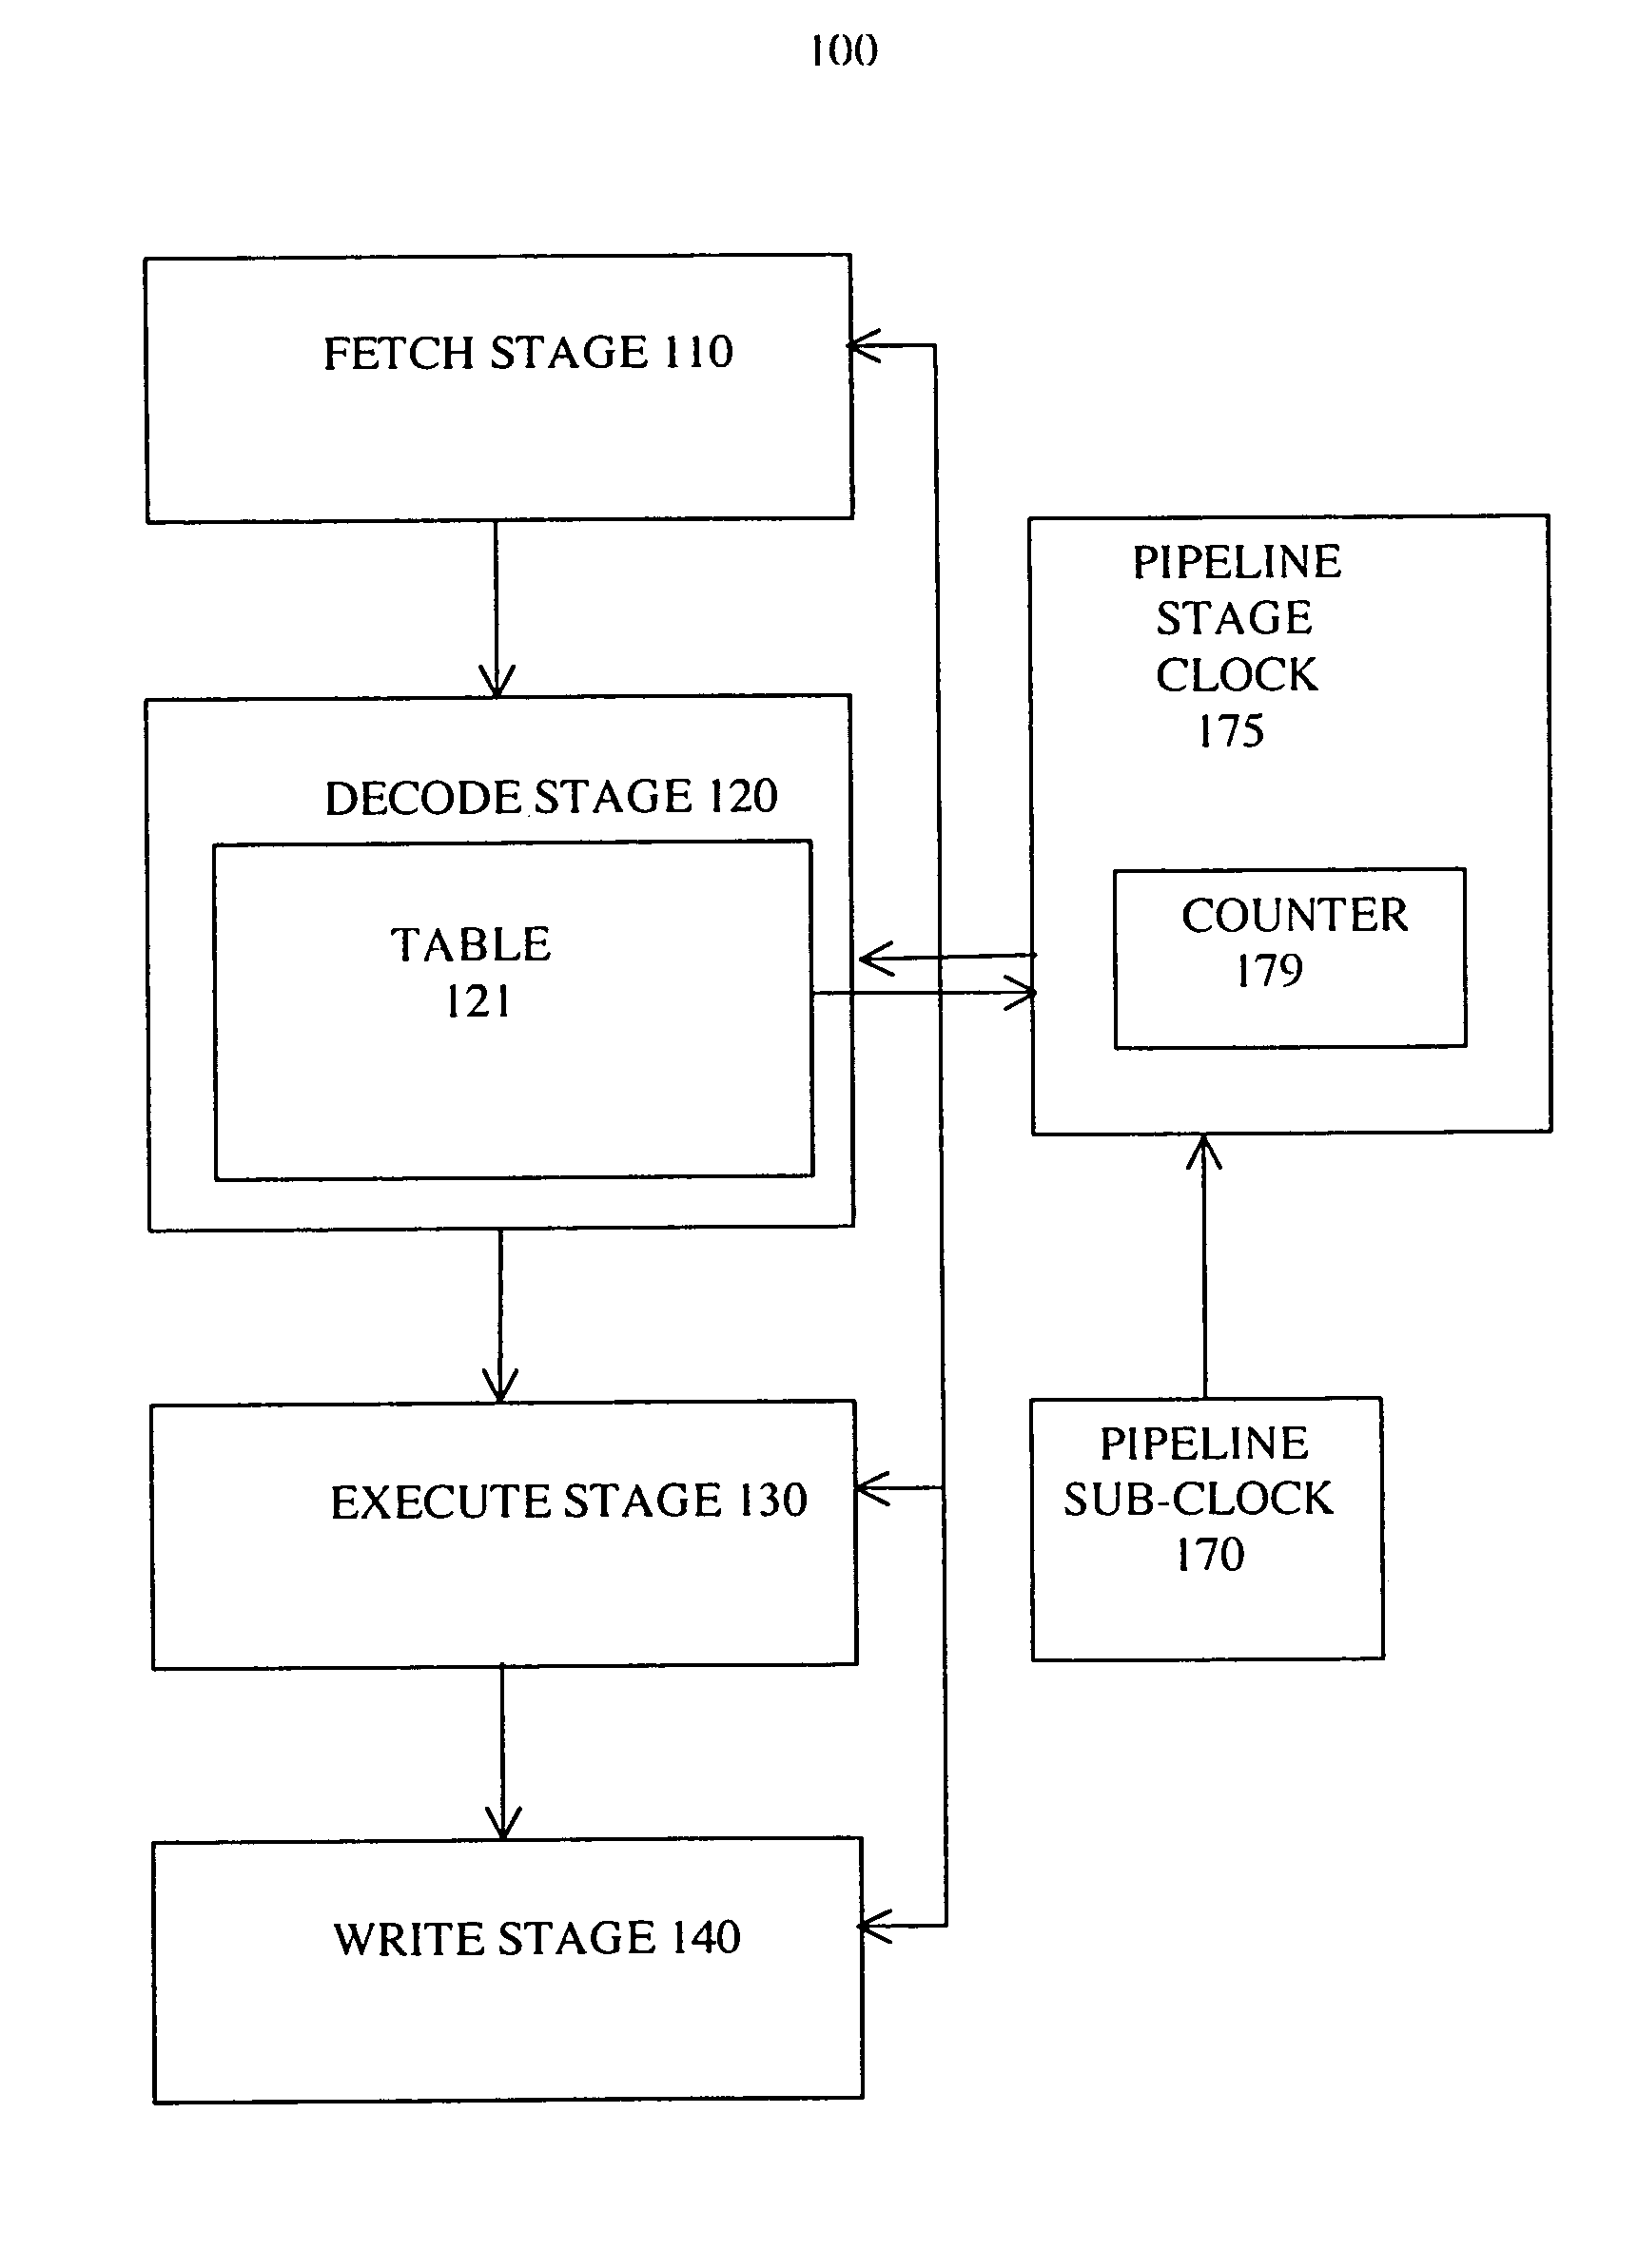 Adjustable cycle pipeline system and method